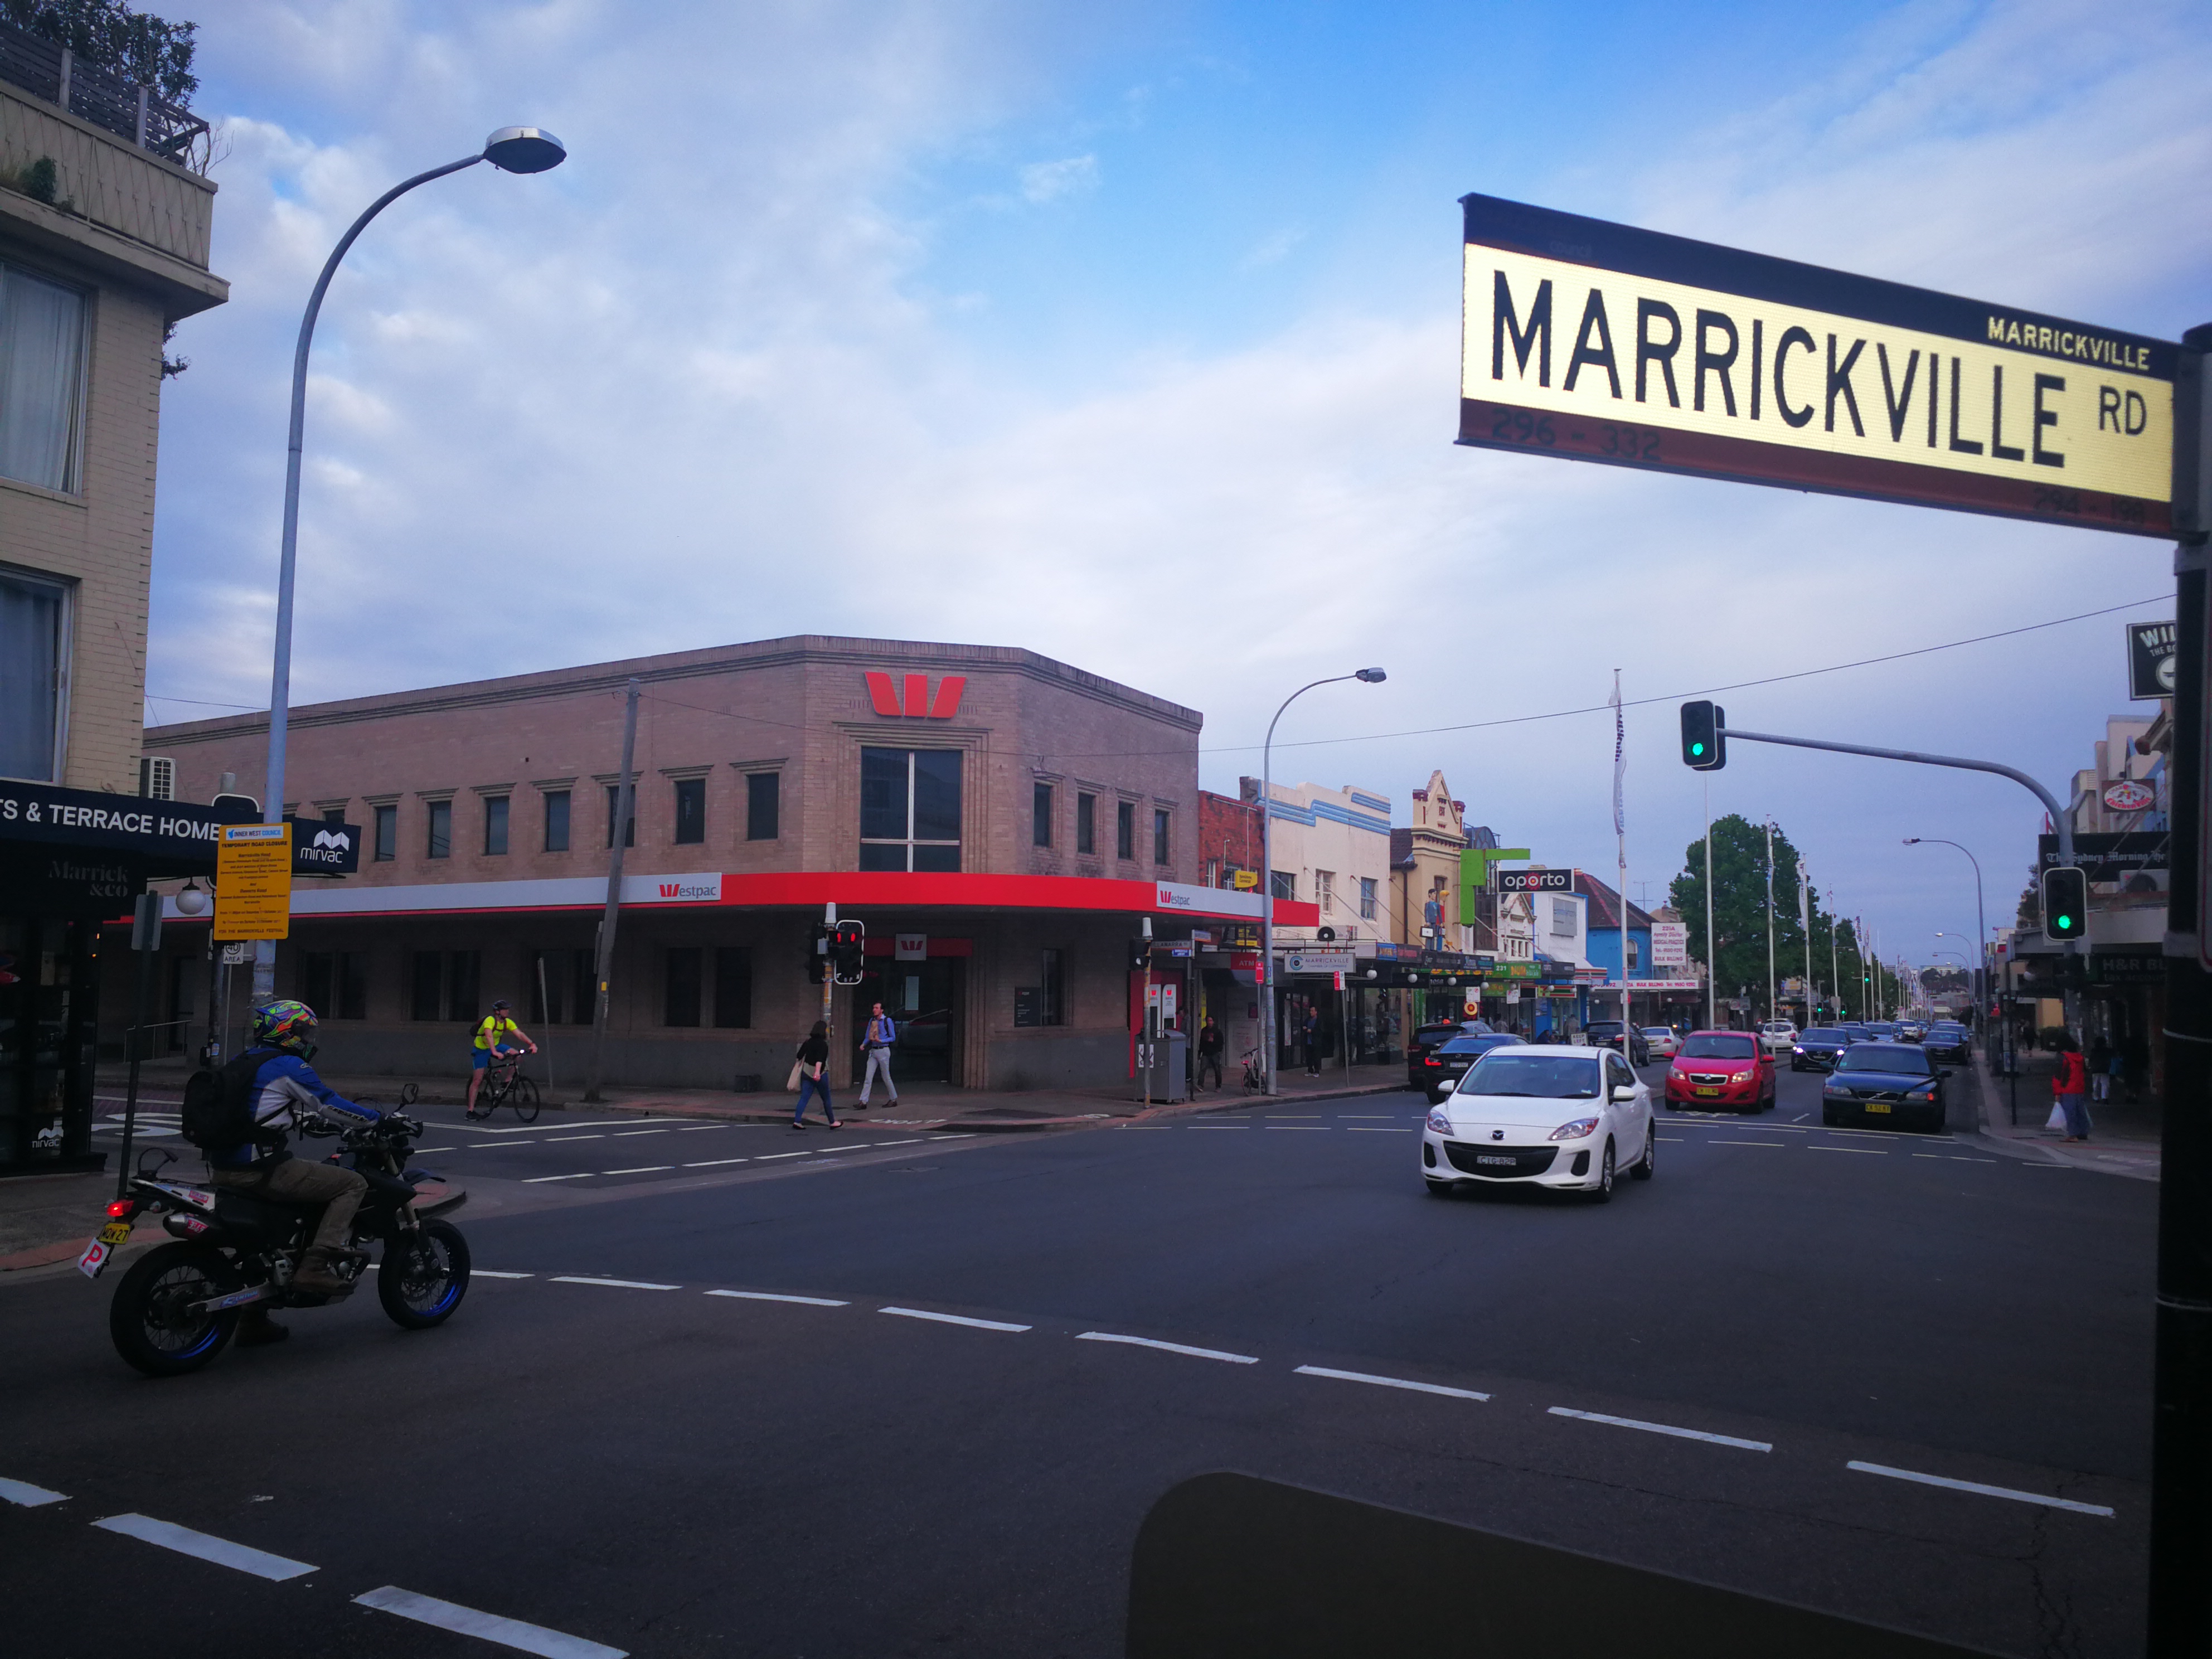 Corner of Illawarra rd and Marrickville rd, looking towards the right. Image: Christopher Kelly